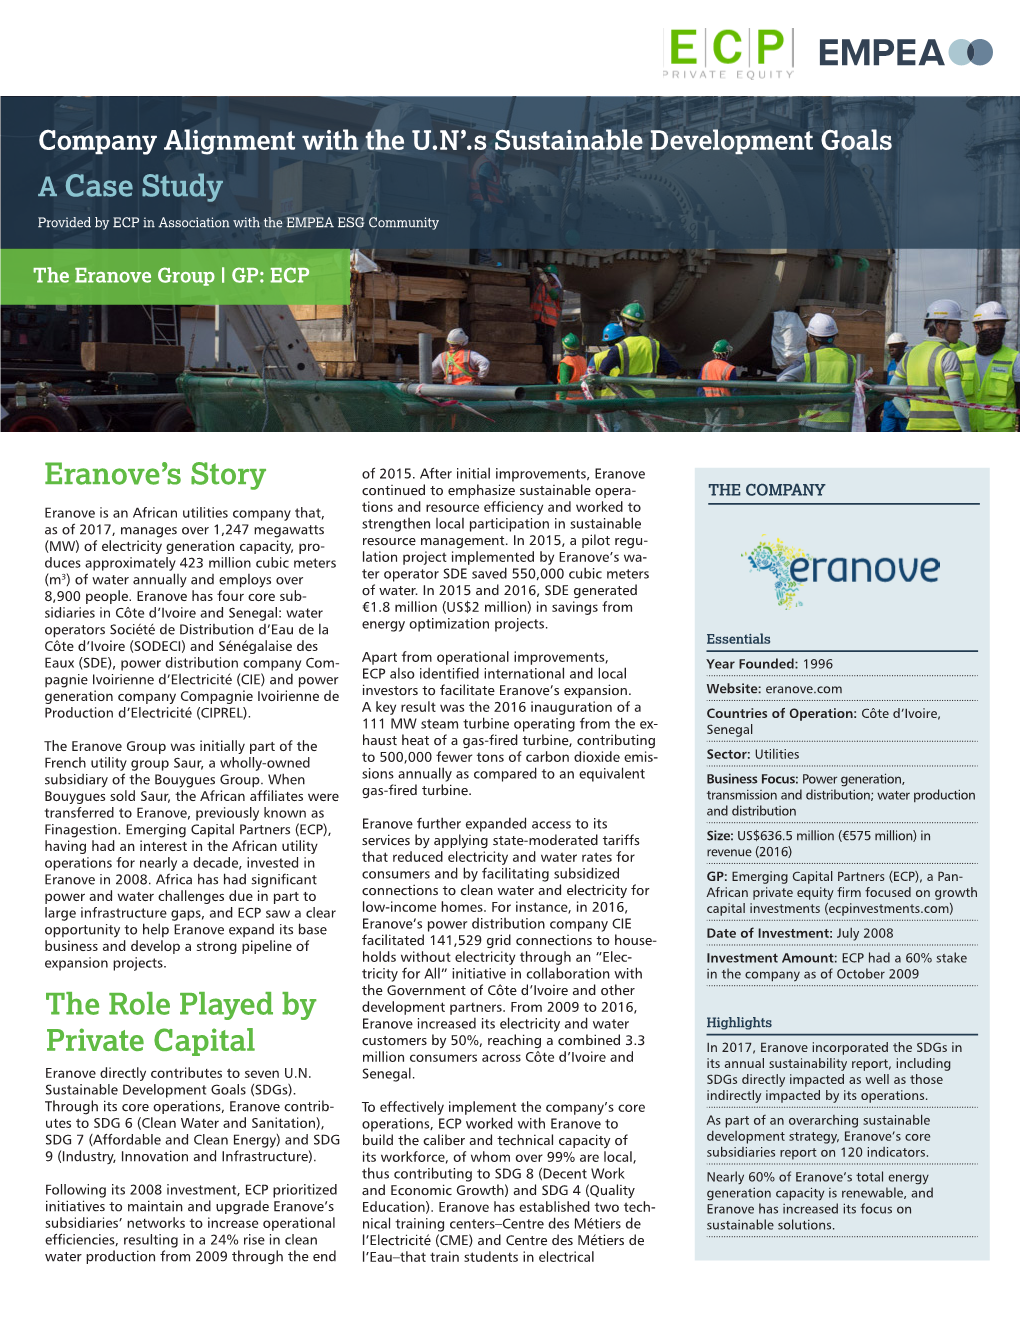 A Case Study Eranove's Story the Role Played by Private Capital